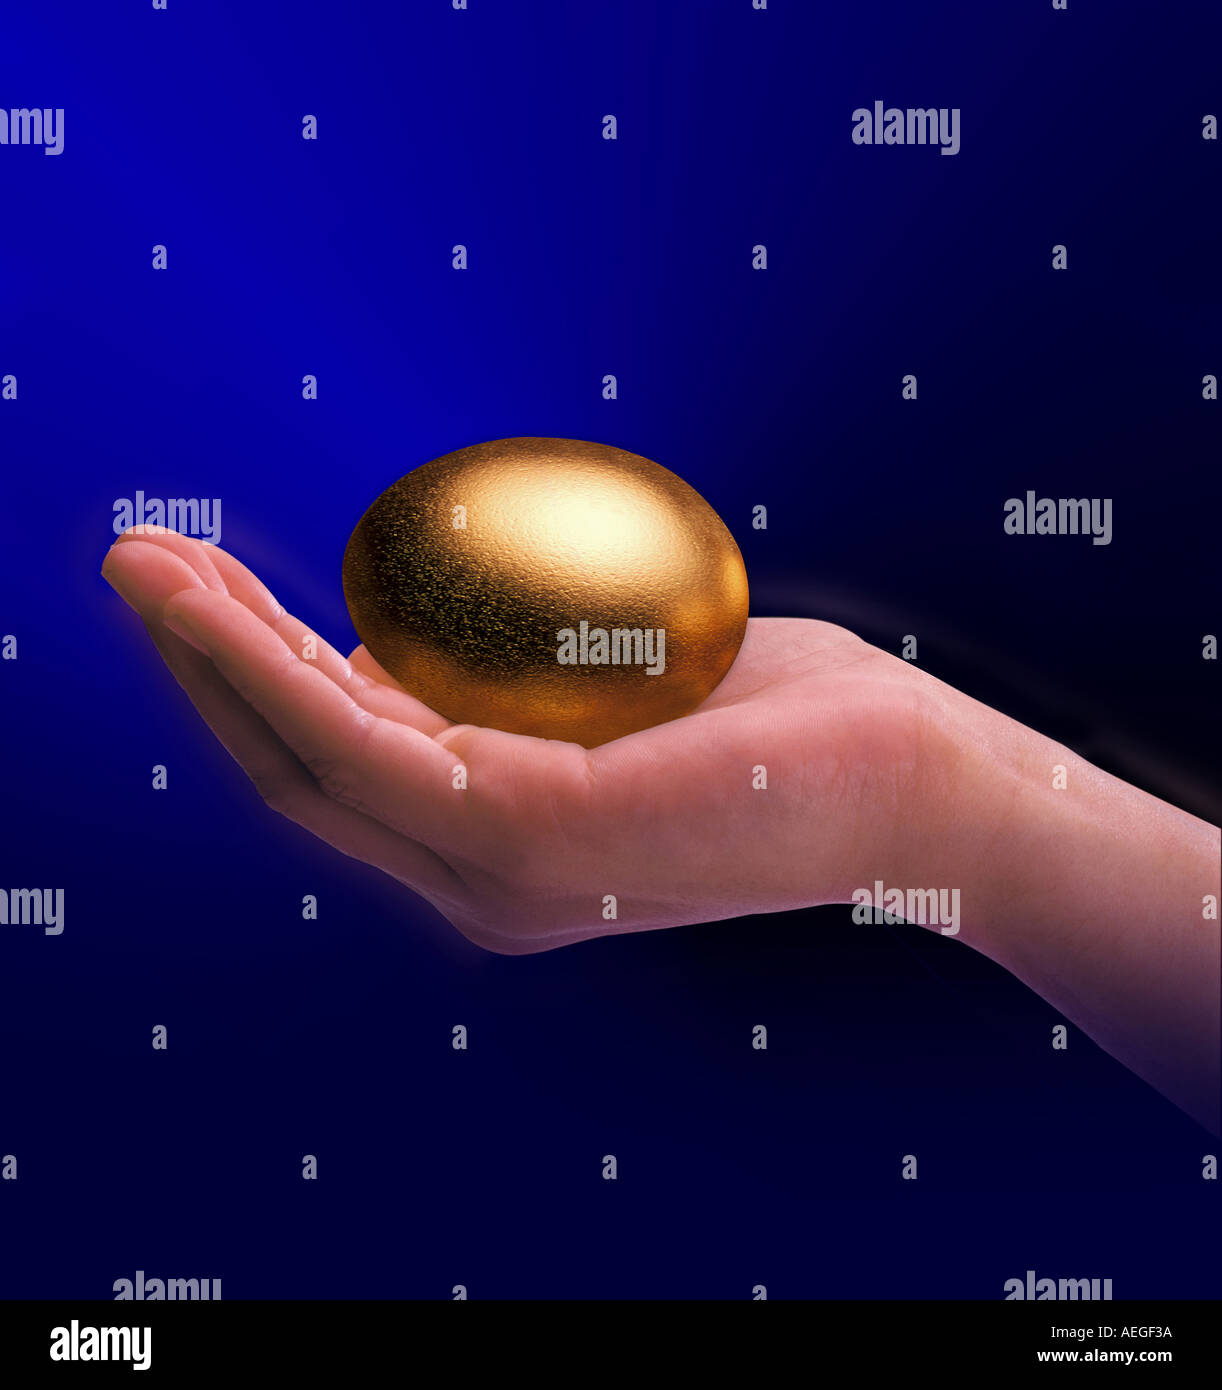 Office golden egg hand holding value valuable wealth resources gold money conceptual success miscellaneous background texture Stock Photo